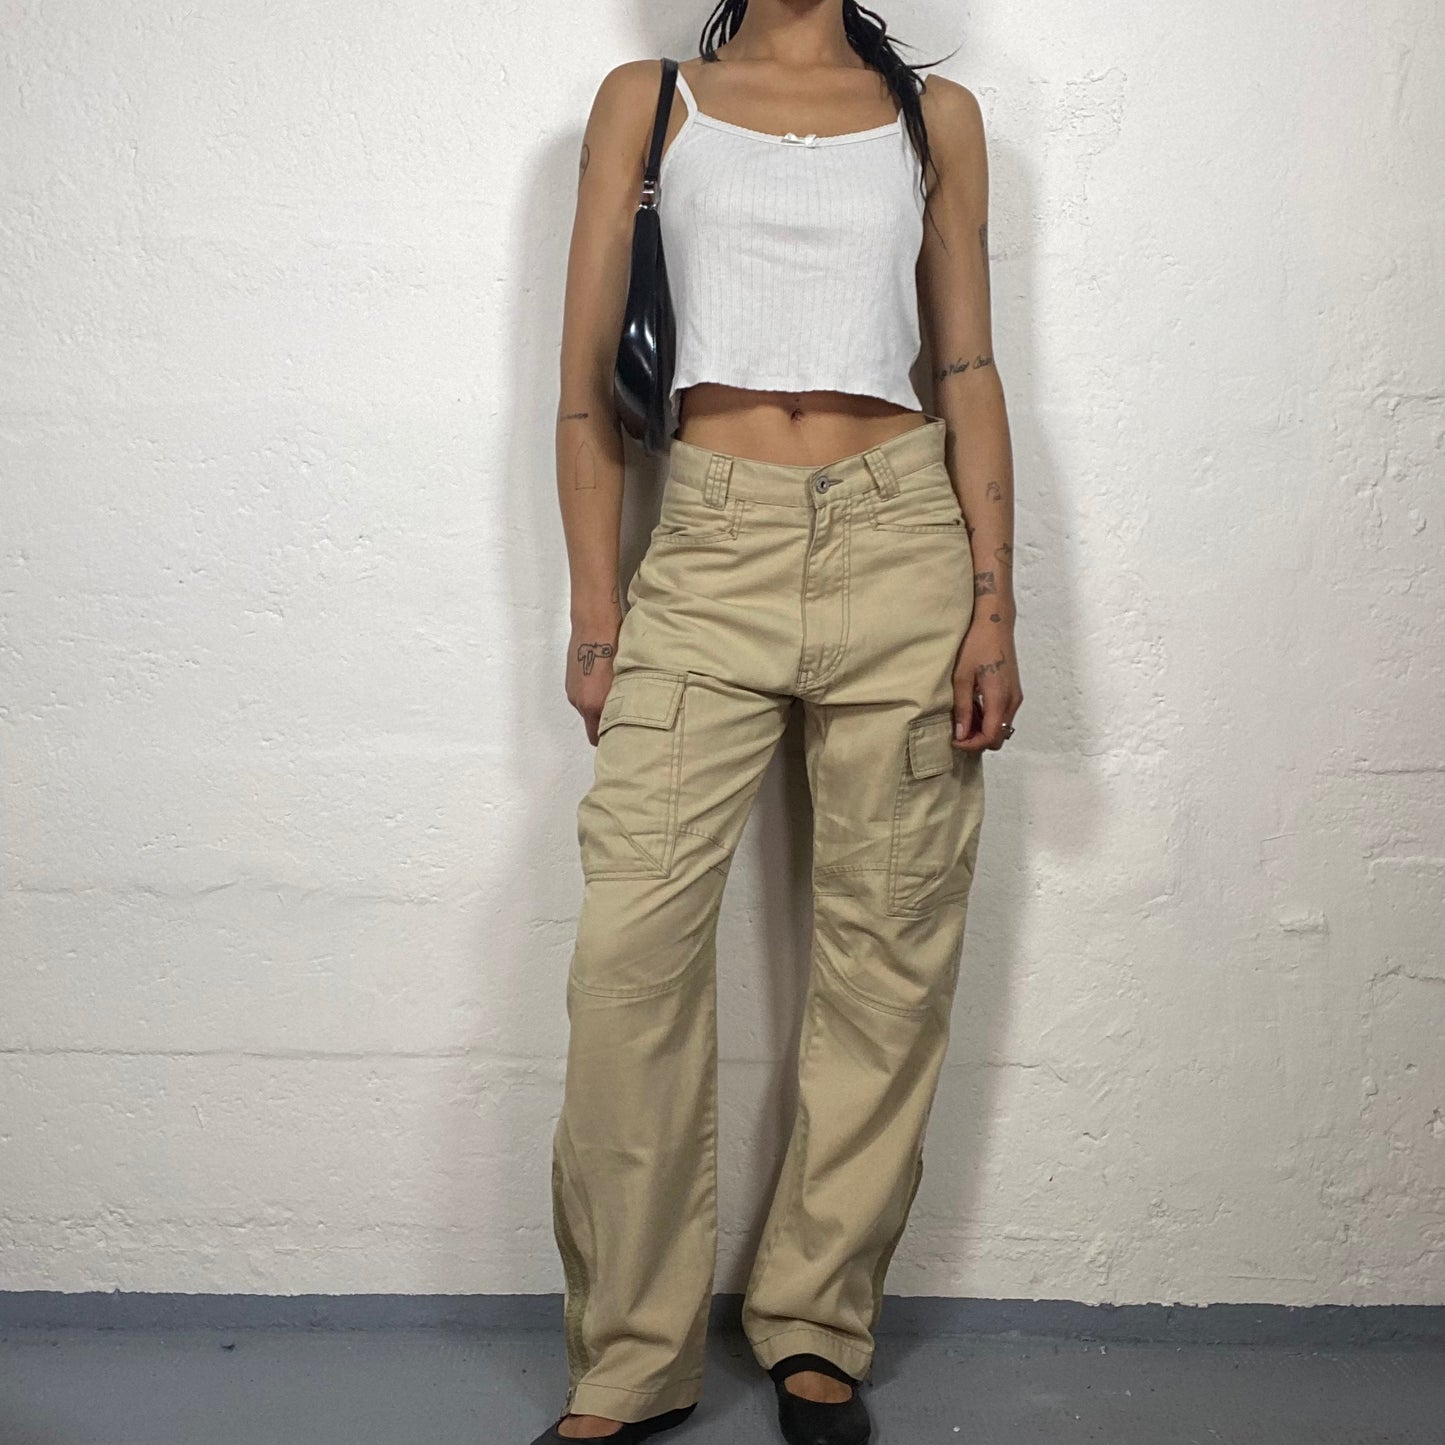 Vintage 2000’s Skater Girl Sand Coloured Baggy Low Waisted Jeans with Side Pockets (M)